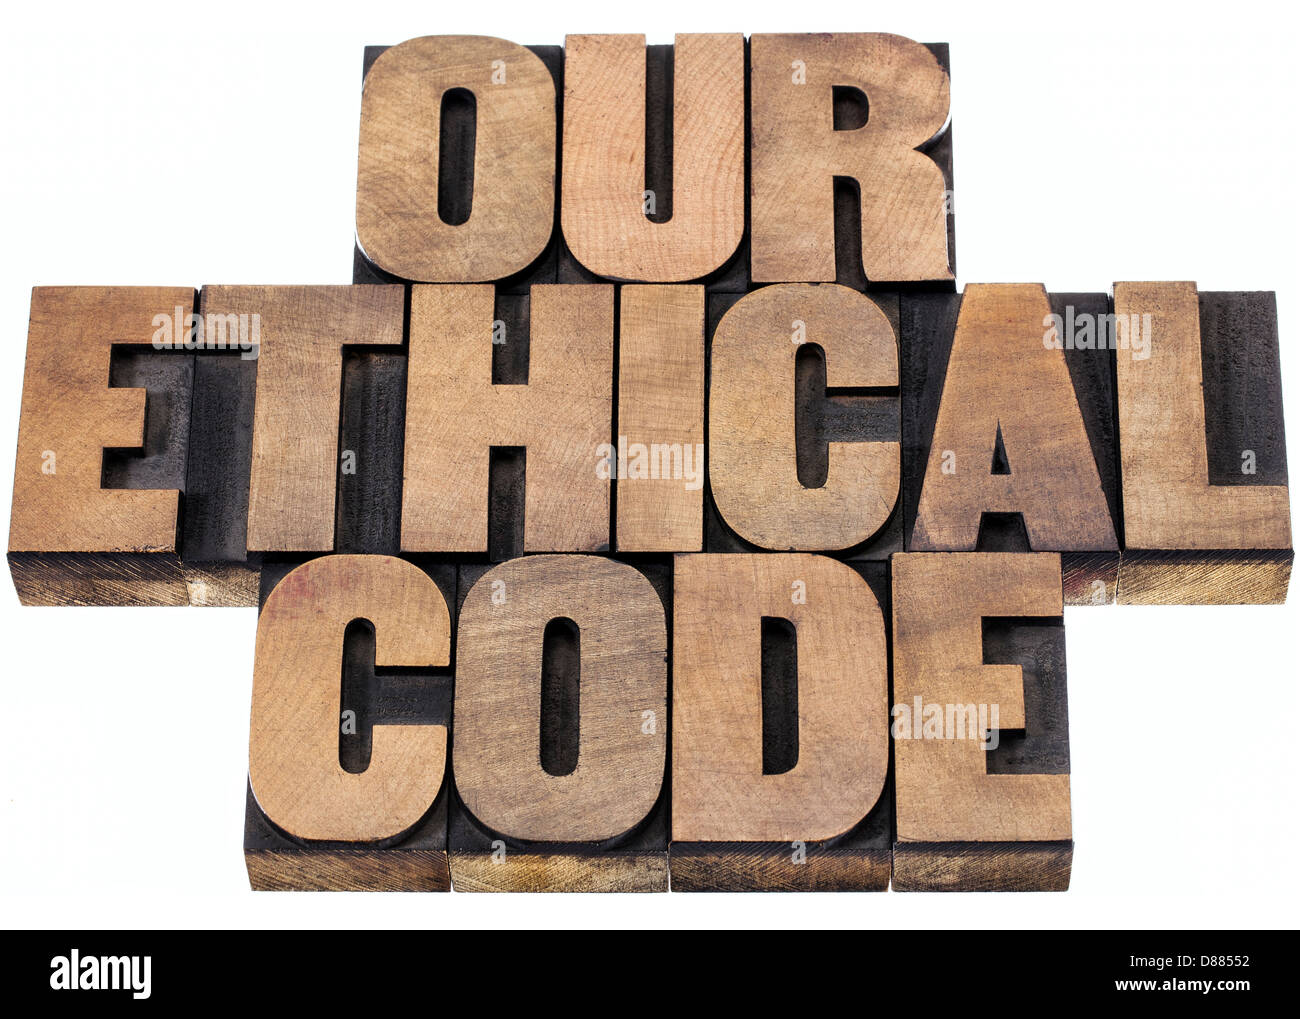 our ethical code - isolated text in letterpress wood type printing blocks Stock Photo